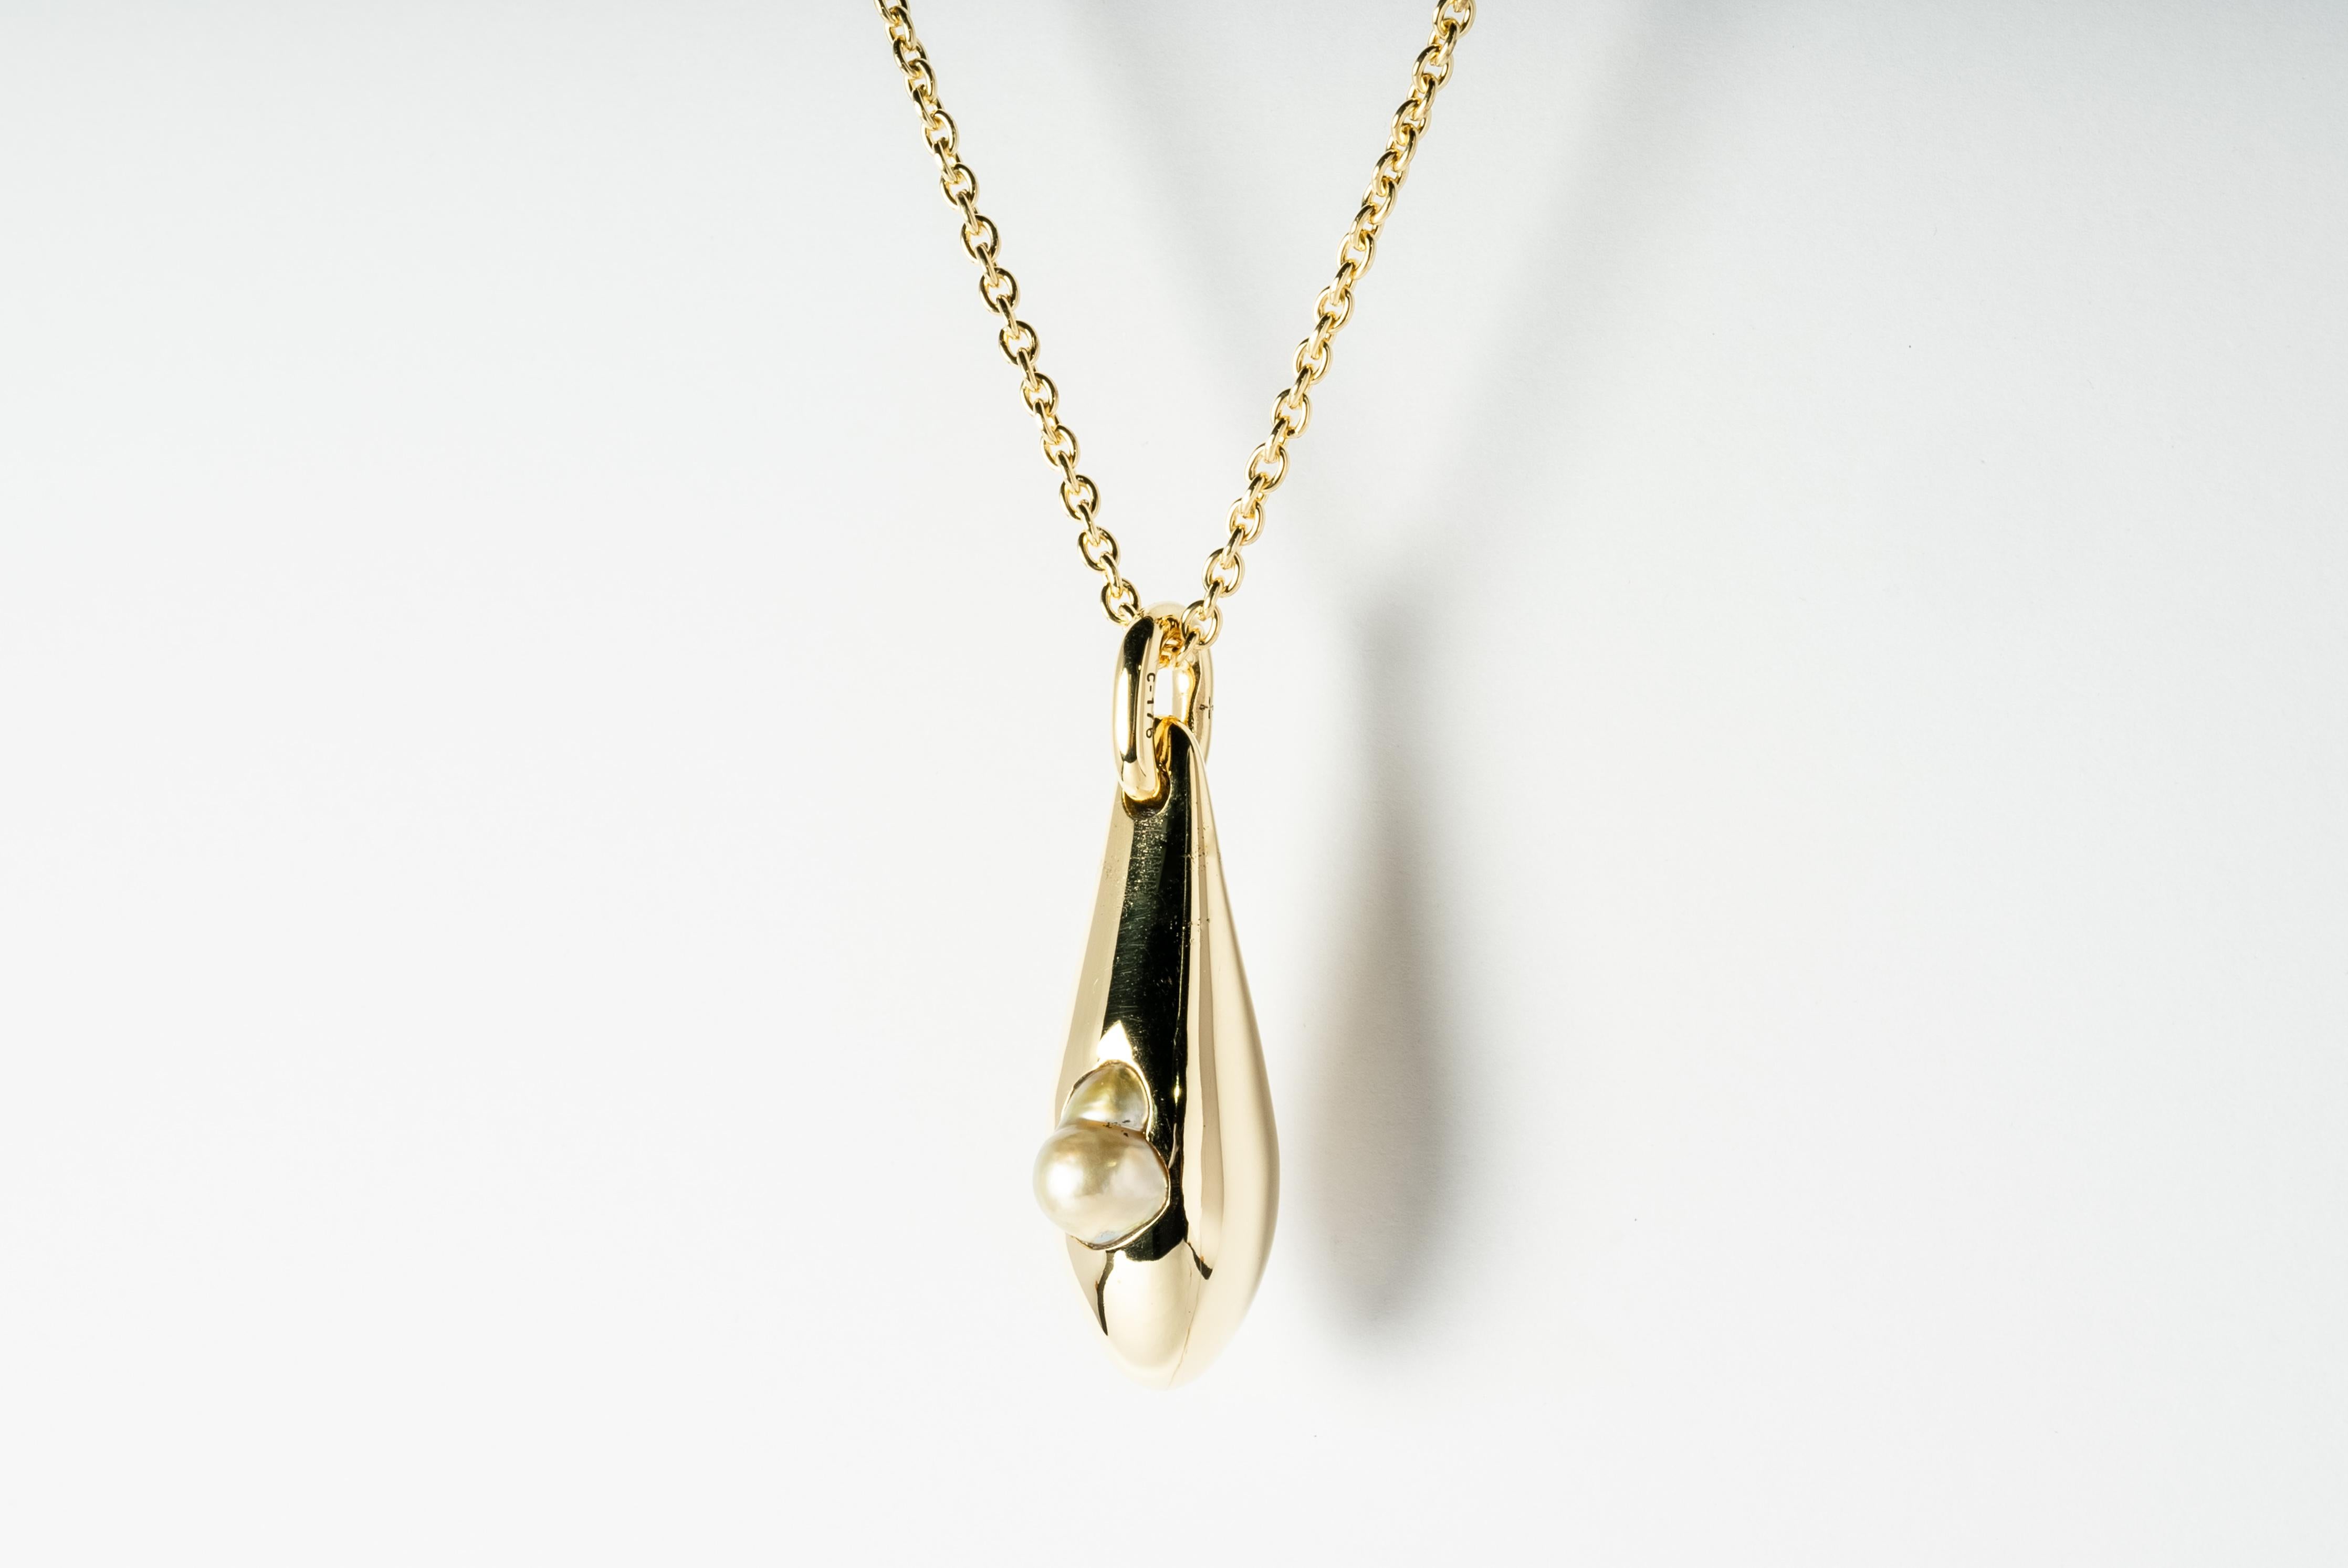 Necklace made in brass, sterling silver, and a golden pearl. The brass and sterling silver are substrate, polished, and electroplated with 18k gold. The golden pearl is a rare specimen of a baroque tear-dropped saltwater pearls. This is wild and